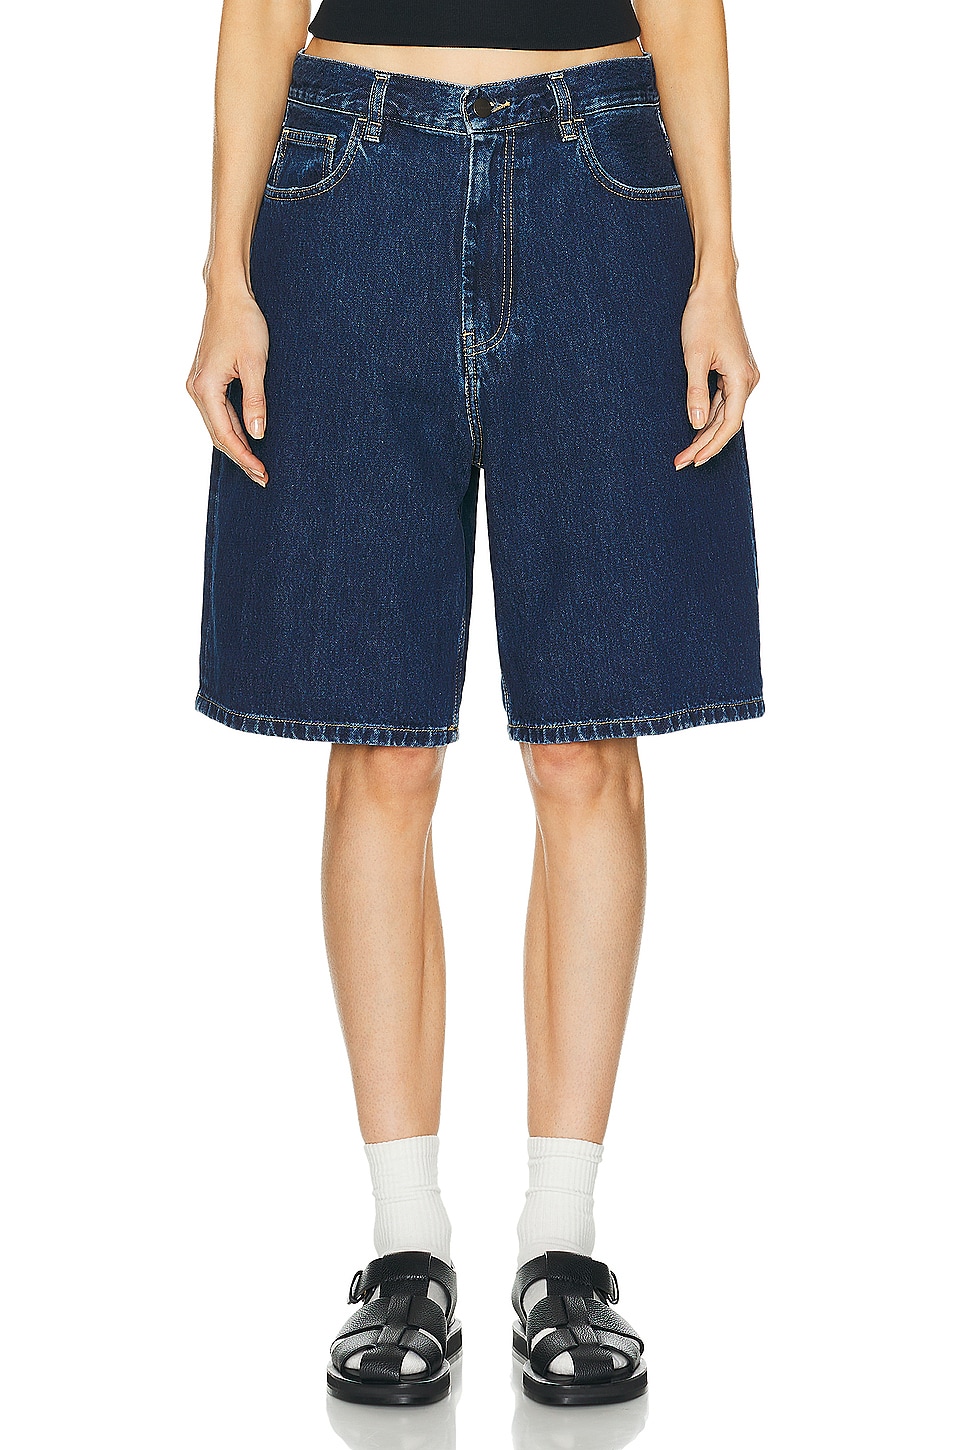 Image 1 of Carhartt WIP Brandon Short in Blue Stone Washed